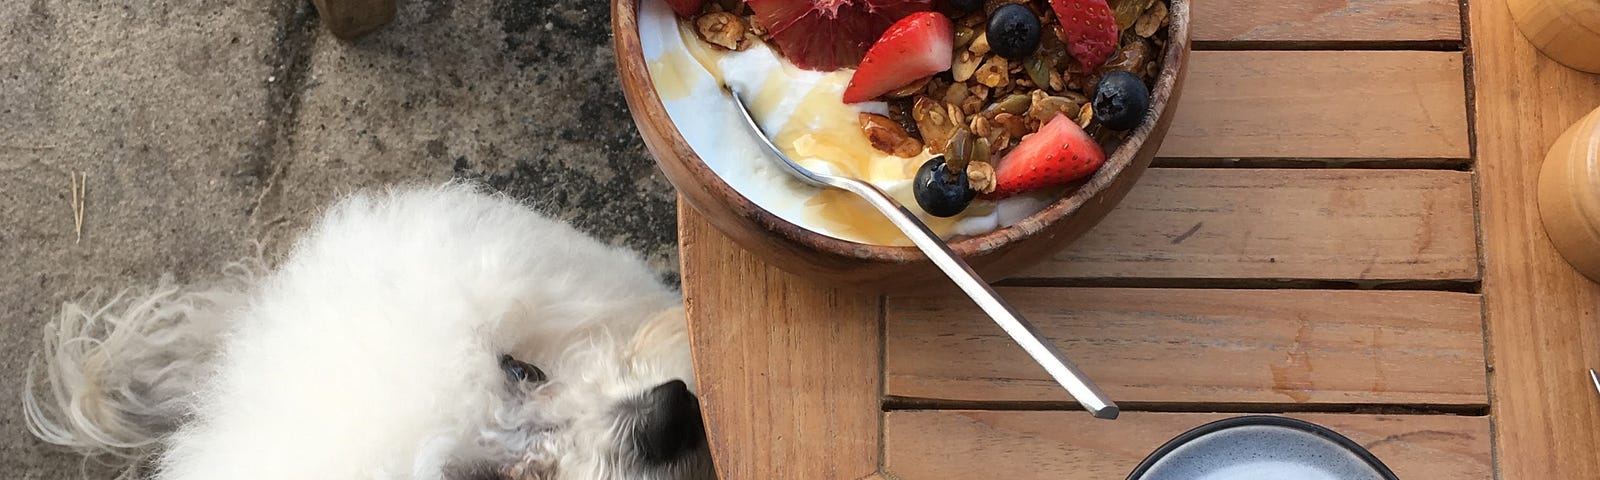 A white fluffy dog sits under a wooden table looking at the food. On teh table is a berry and yogurt bowl and a purple colored latte with a leaf design.